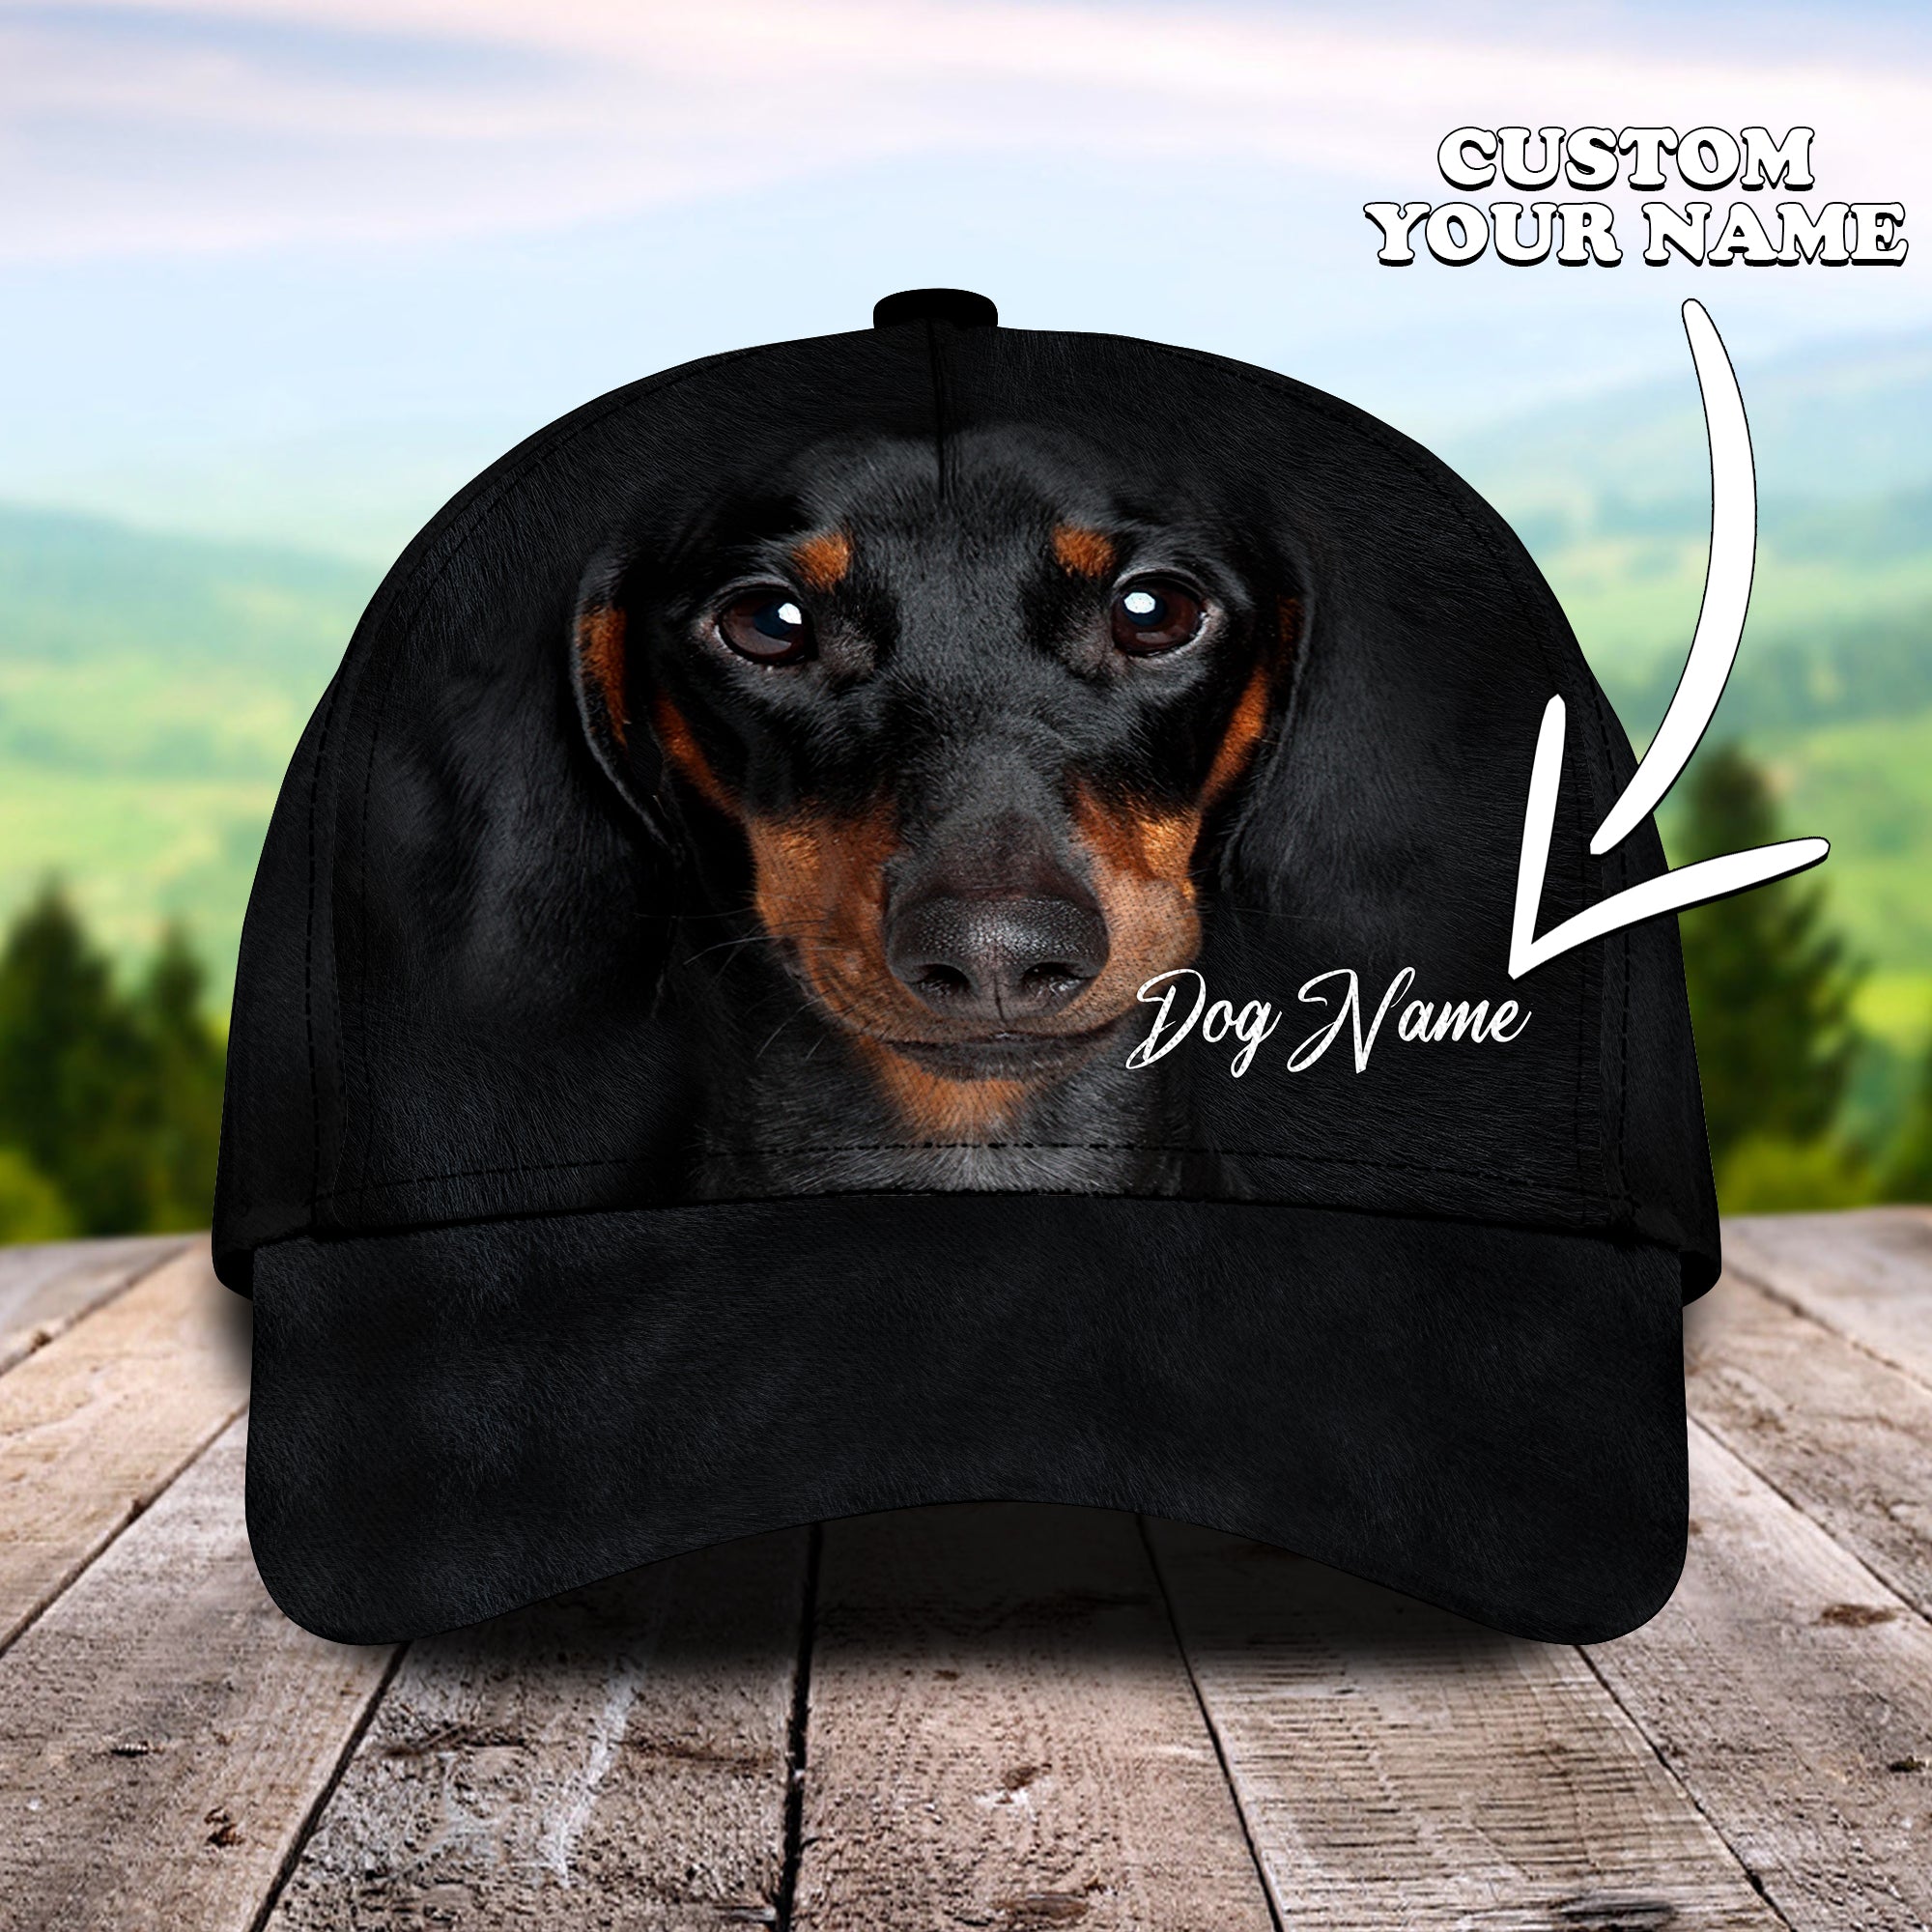 Dachshund - Personalized Name Cap - Co98